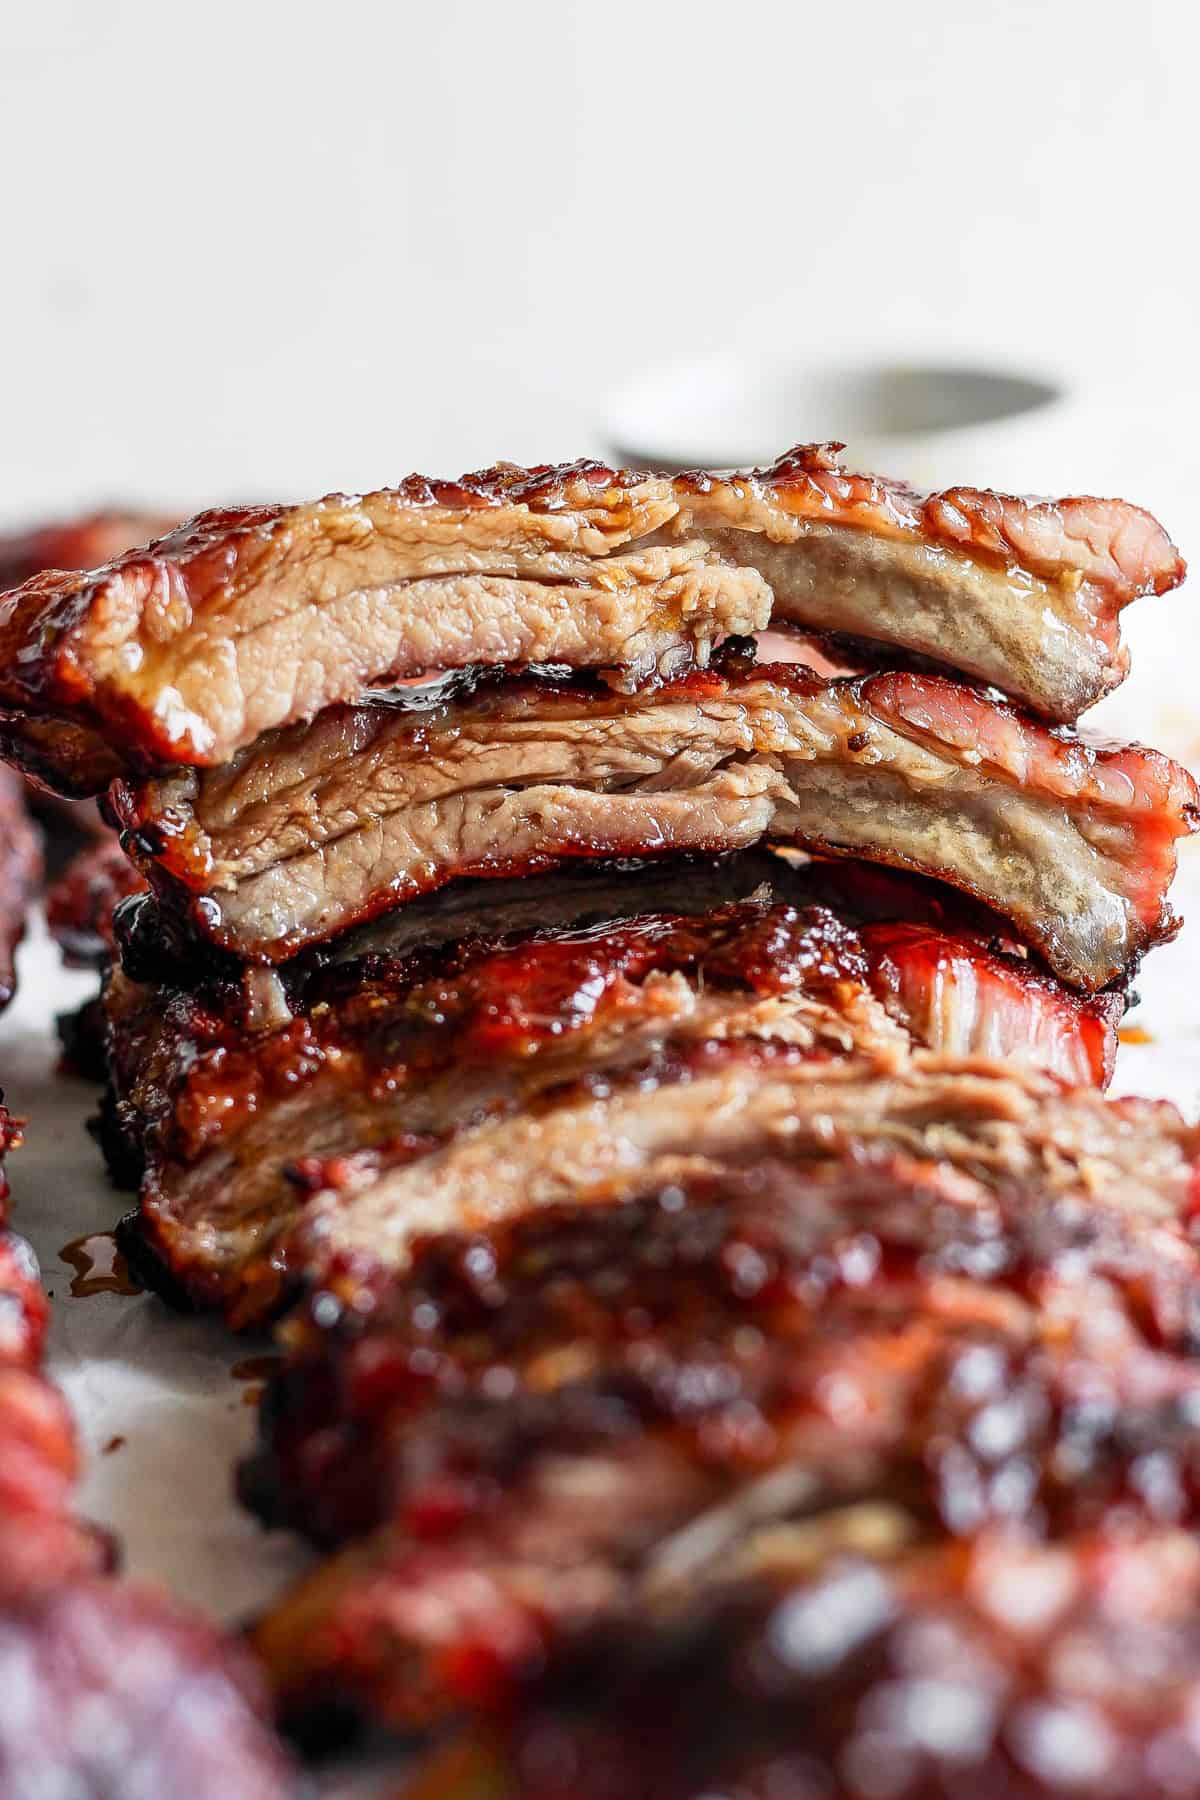 Close-up of a stack of glazed, grilled ribs, with the top piece cut to show a juicy, tender interior. The meat is richly caramelized with a glossy, charred exterior.